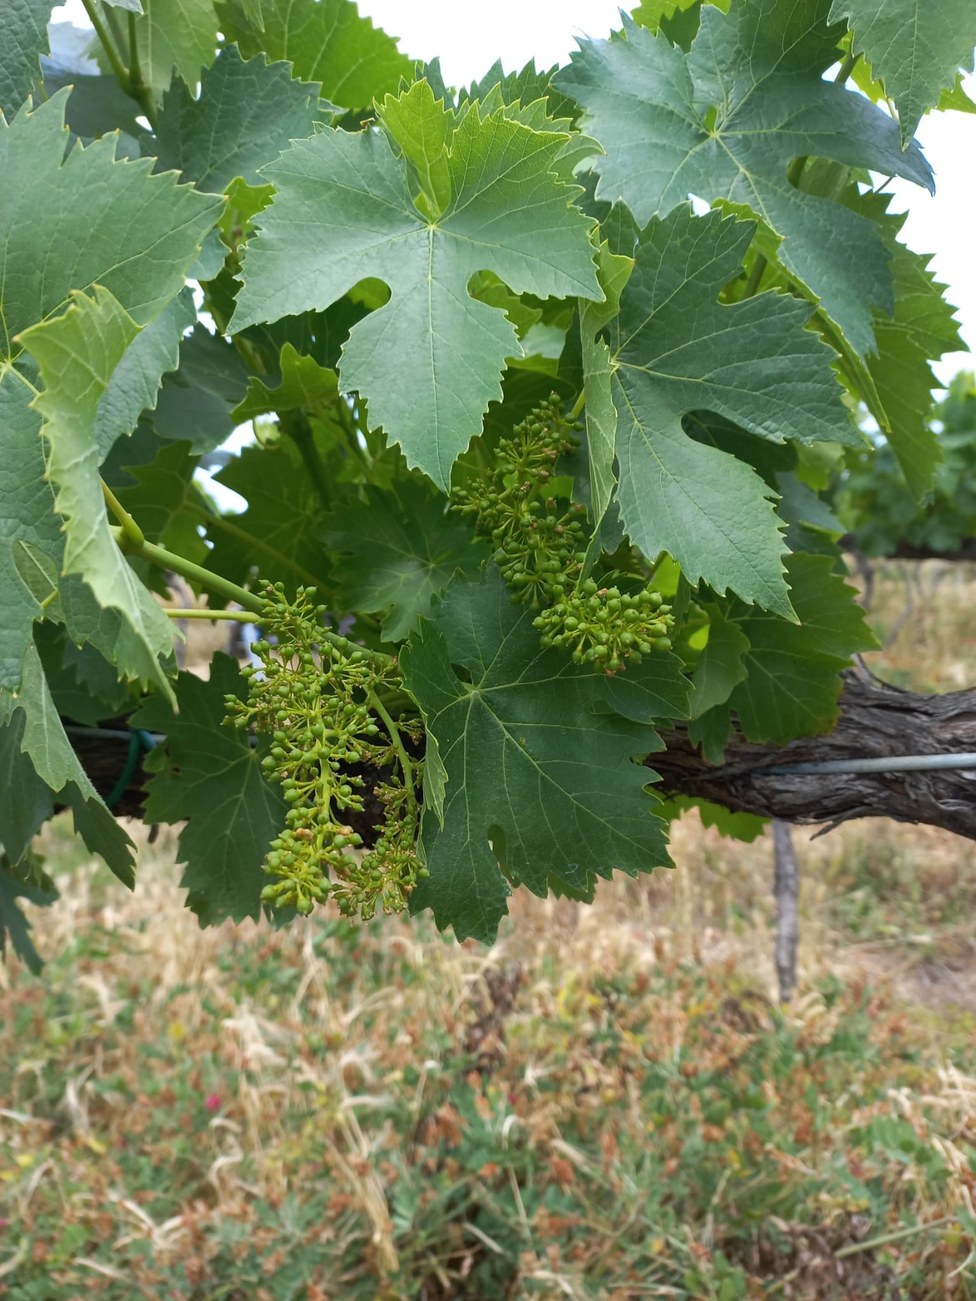 AgroEcology applied to Sangiovese in Romagna: Abundance, Biodiversity and Health